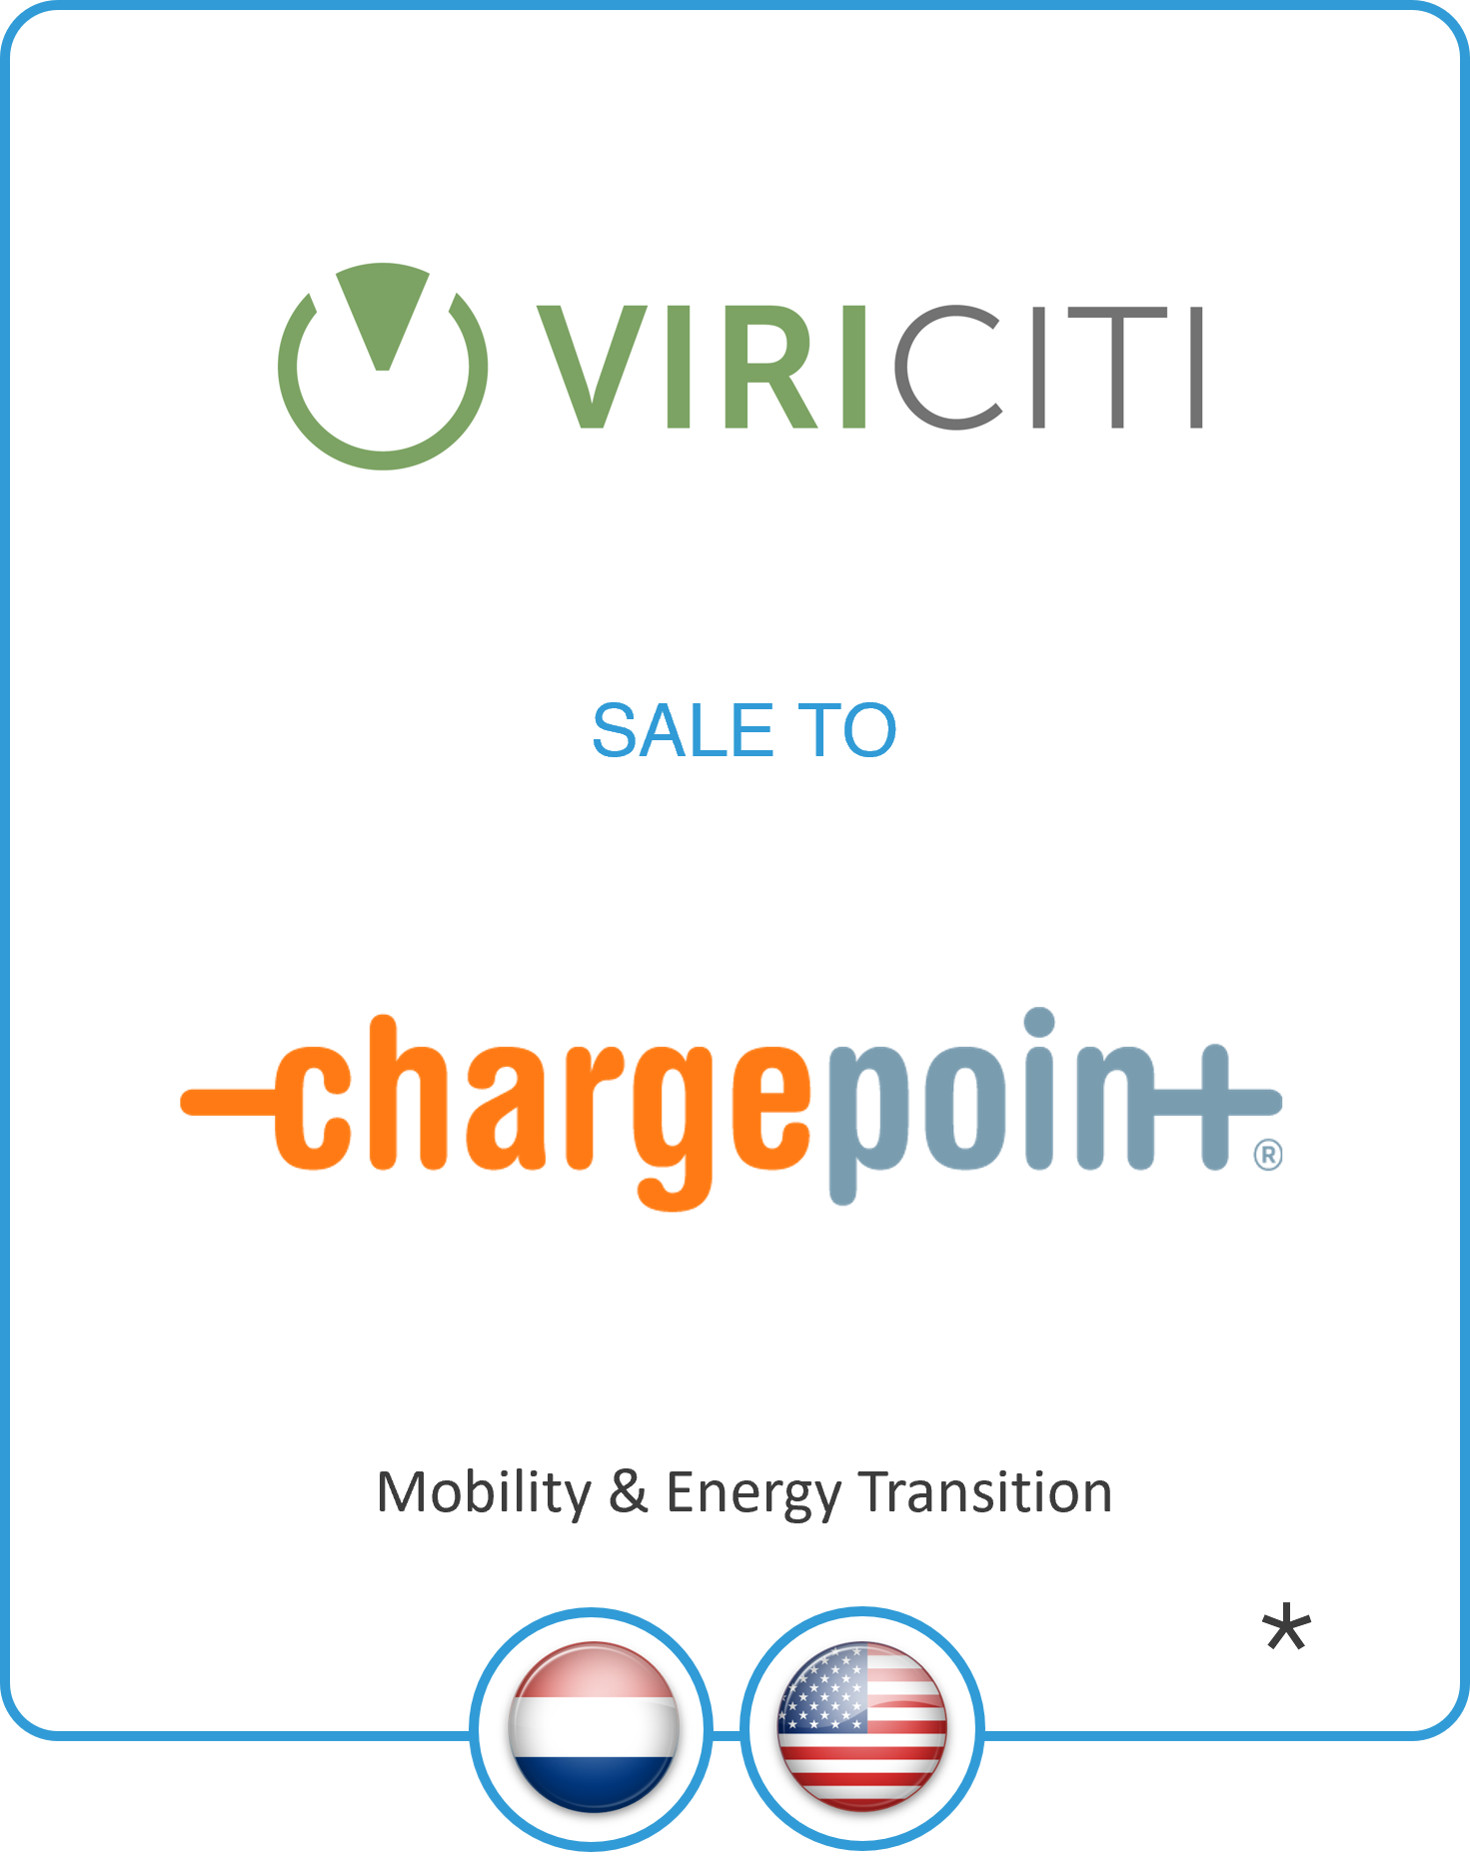 Drake Star Partners Advises Viriciti On Its Sale To Chargepoint